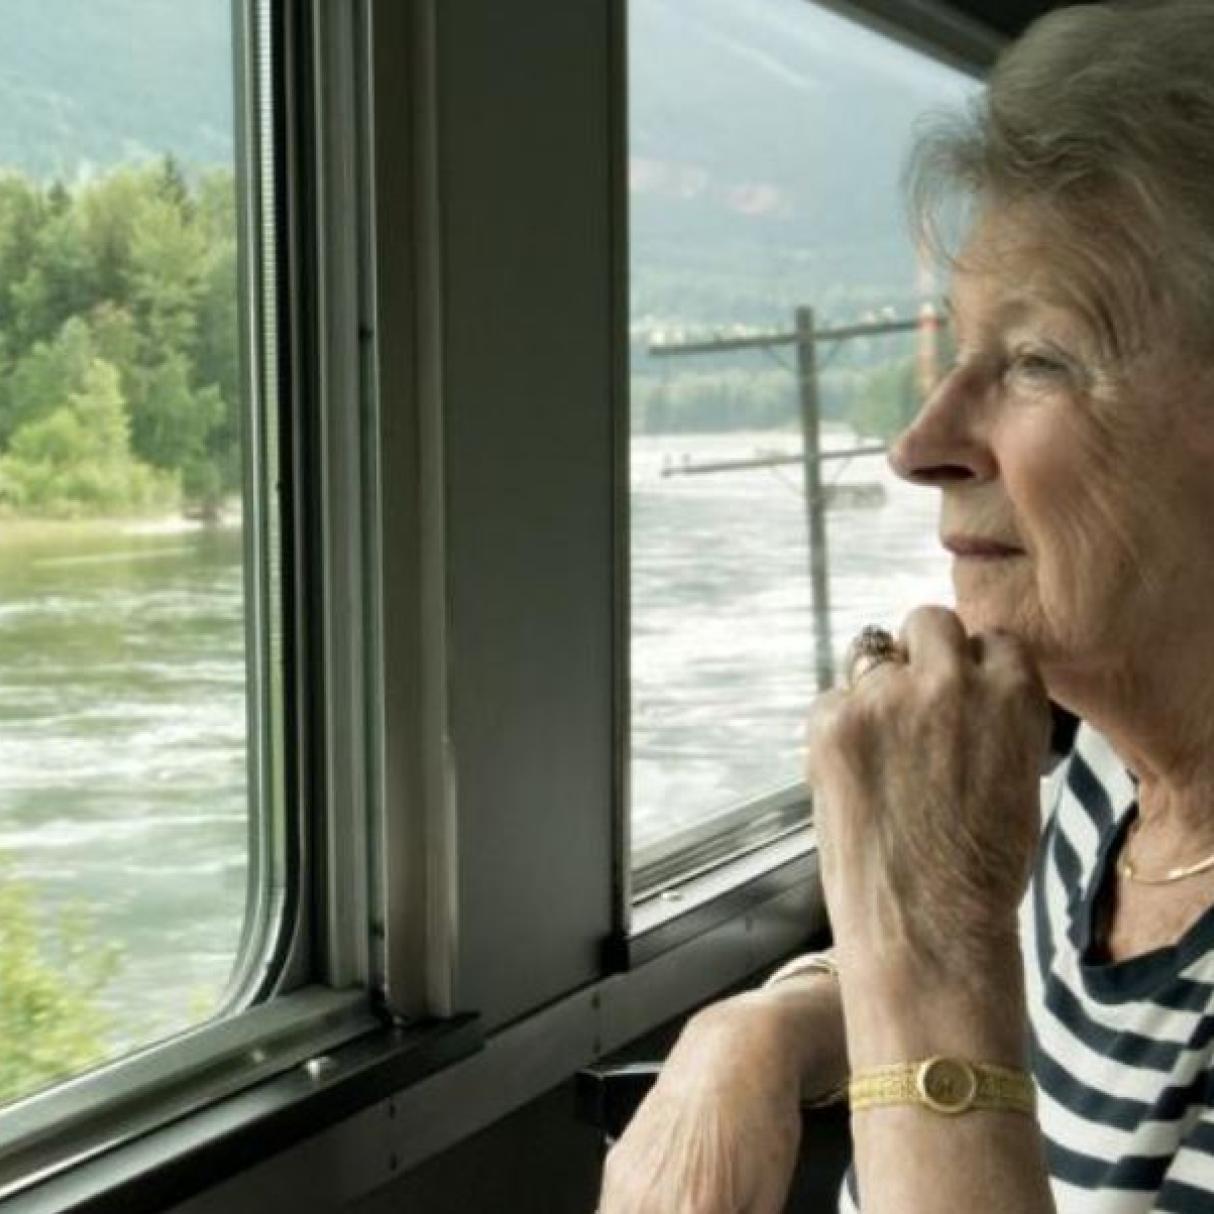 A woman looks out a train window at river and forest